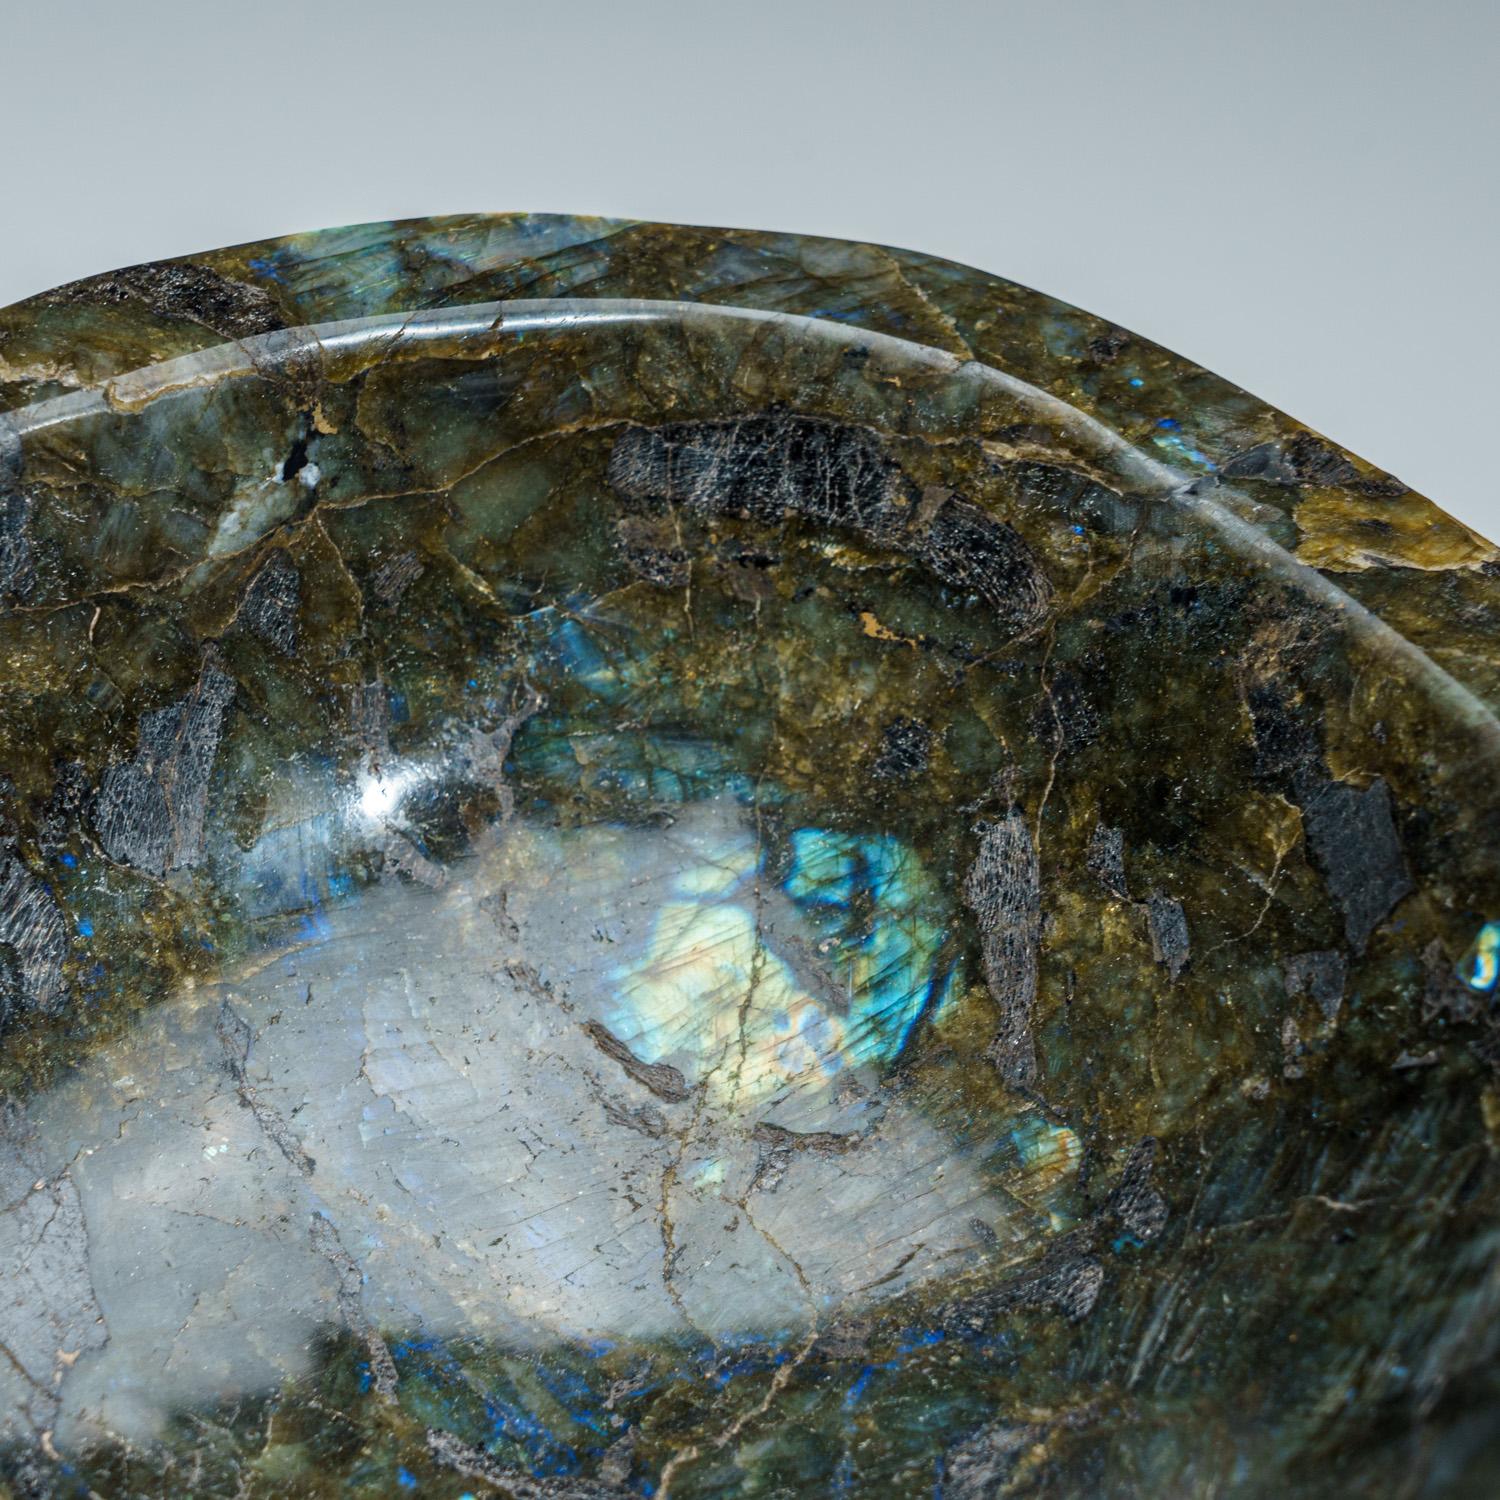 Malagasy Genuine Polished Labradorite Large Bowl from Madagascar (21 lbs) For Sale